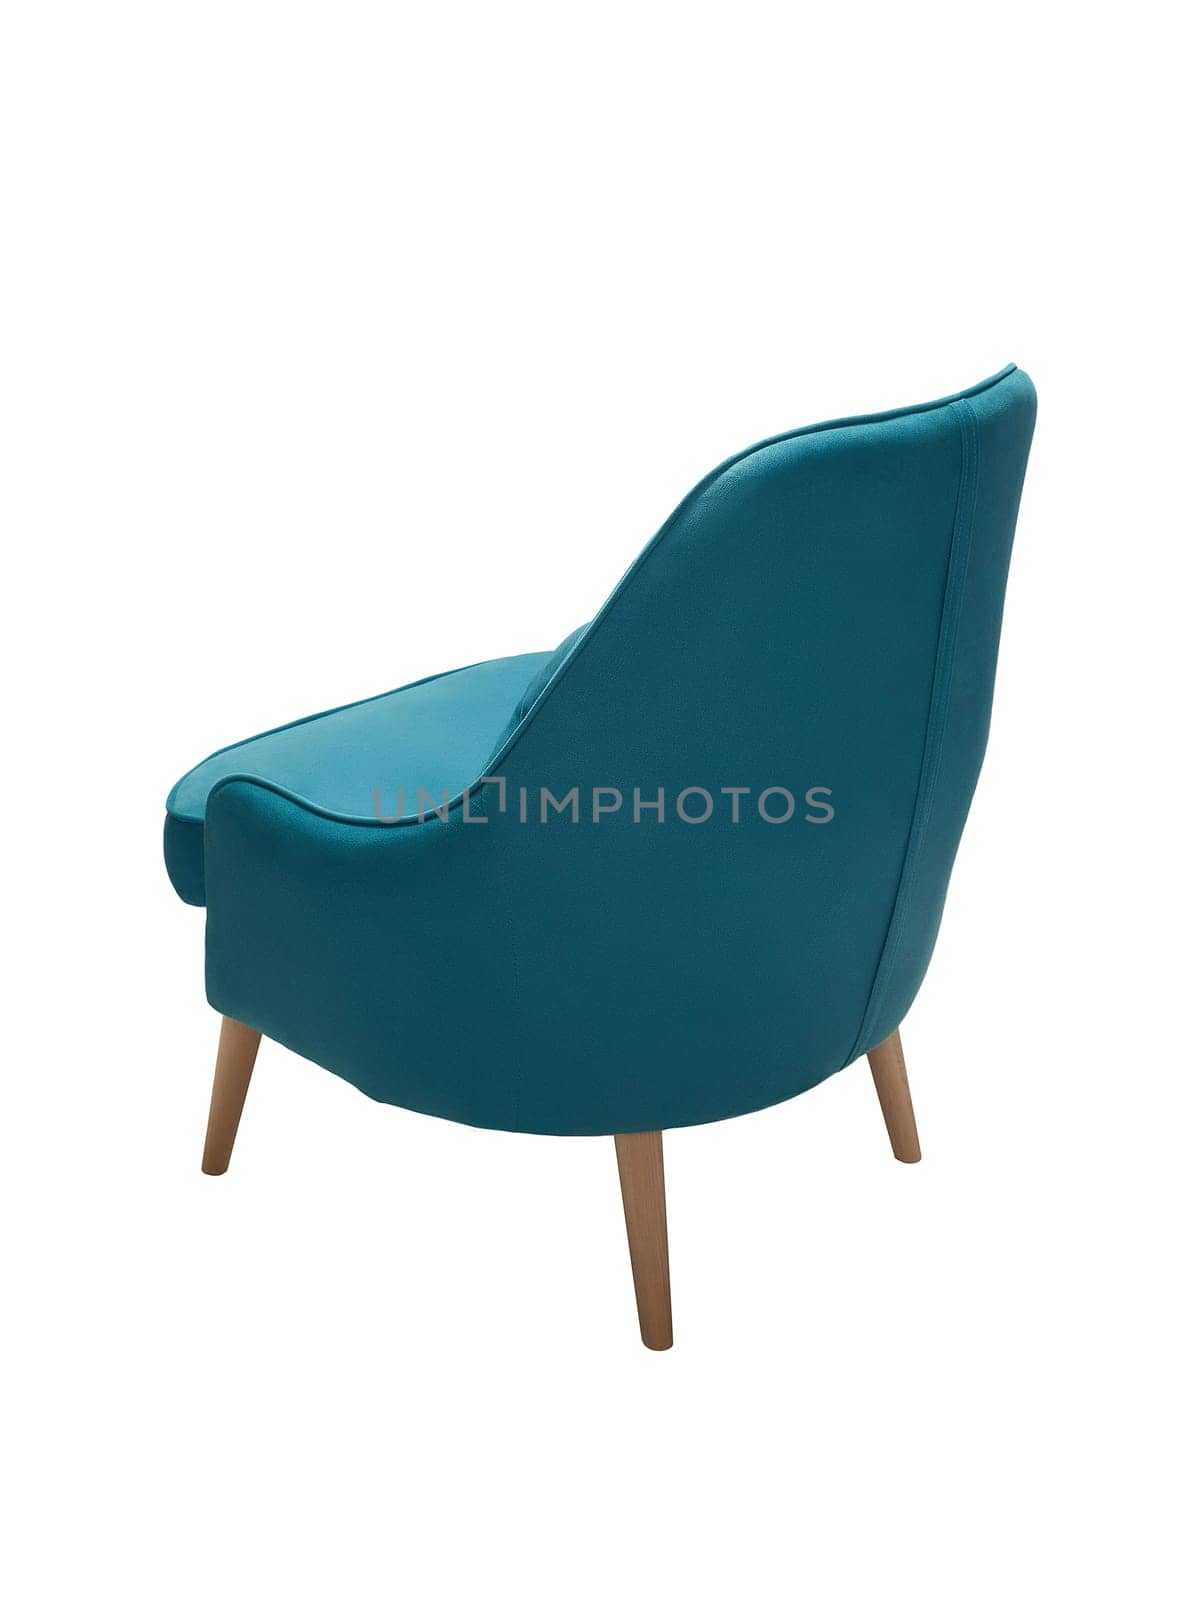 modern blue fabric armchair with wooden legs isolated on white background, back view.